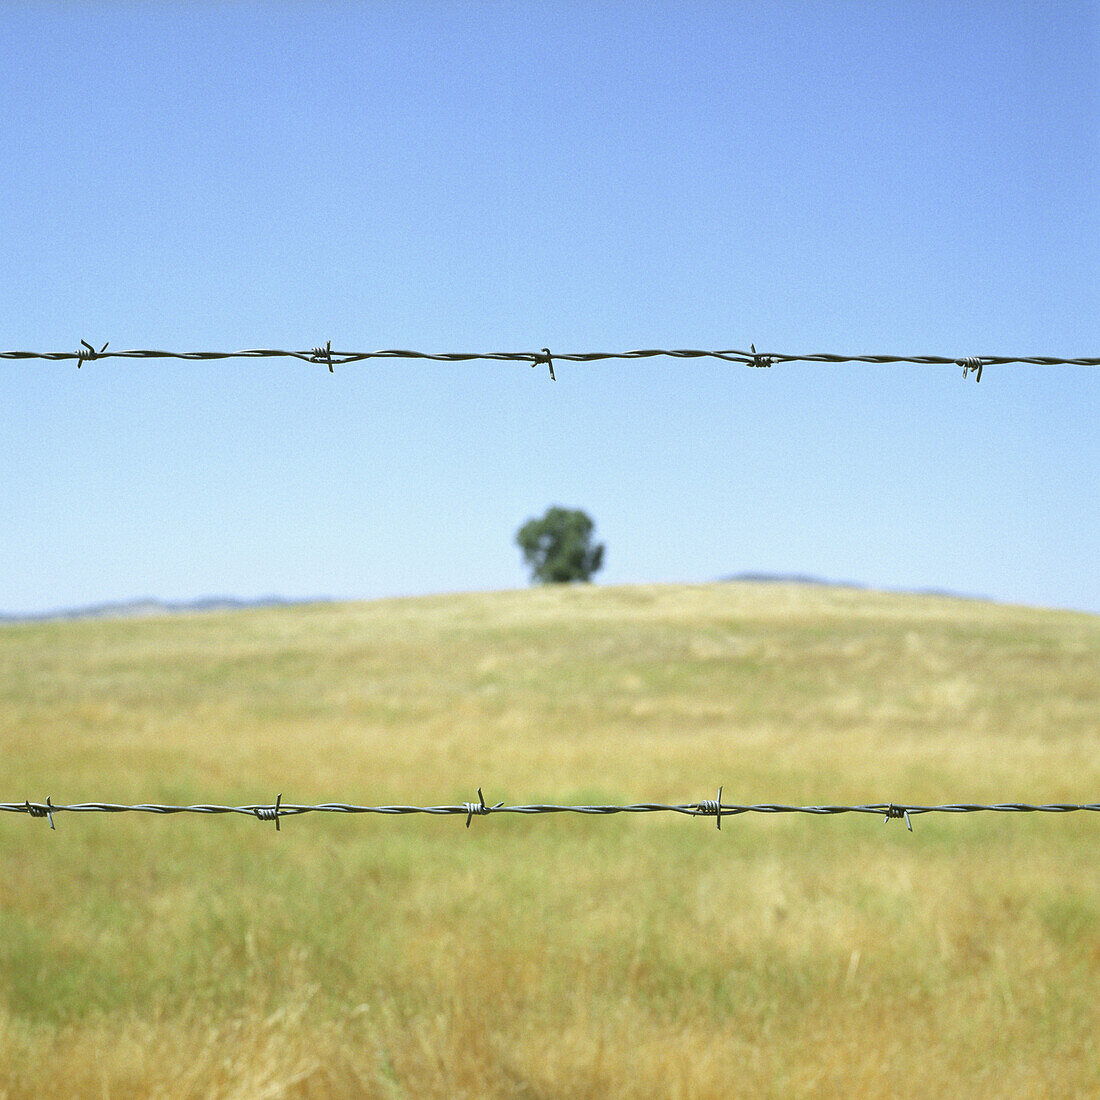 A barbed wire fence in front of a field under a blue sky and sunshine